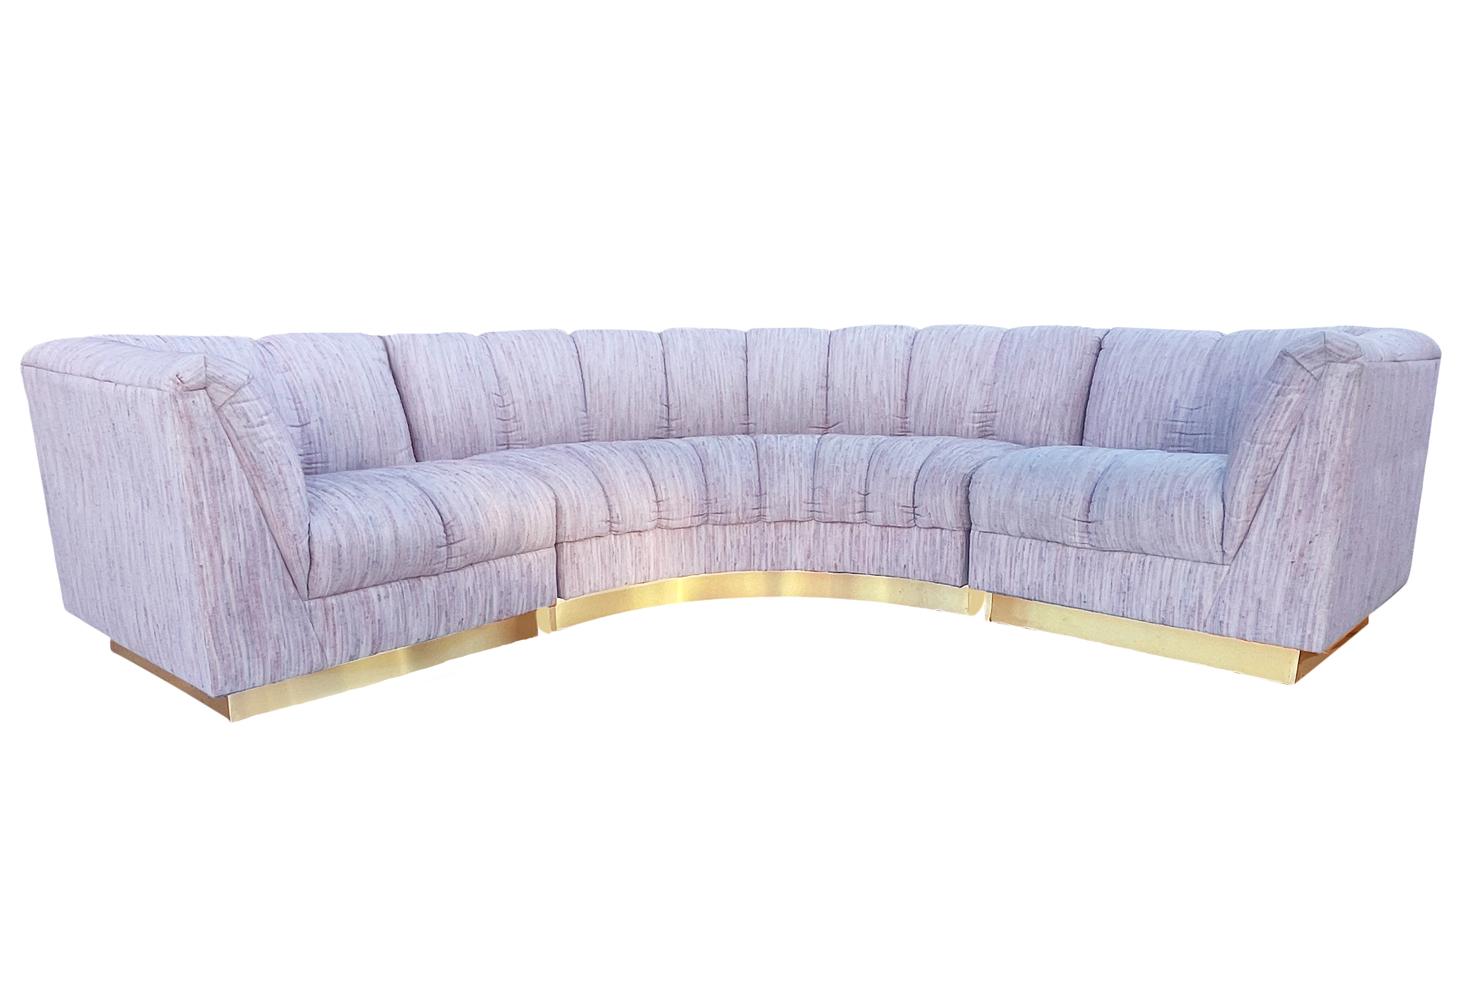 Late 20th Century Mid-Century Modern L-Shape Curved Sectional Sofa with Brass Base For Sale